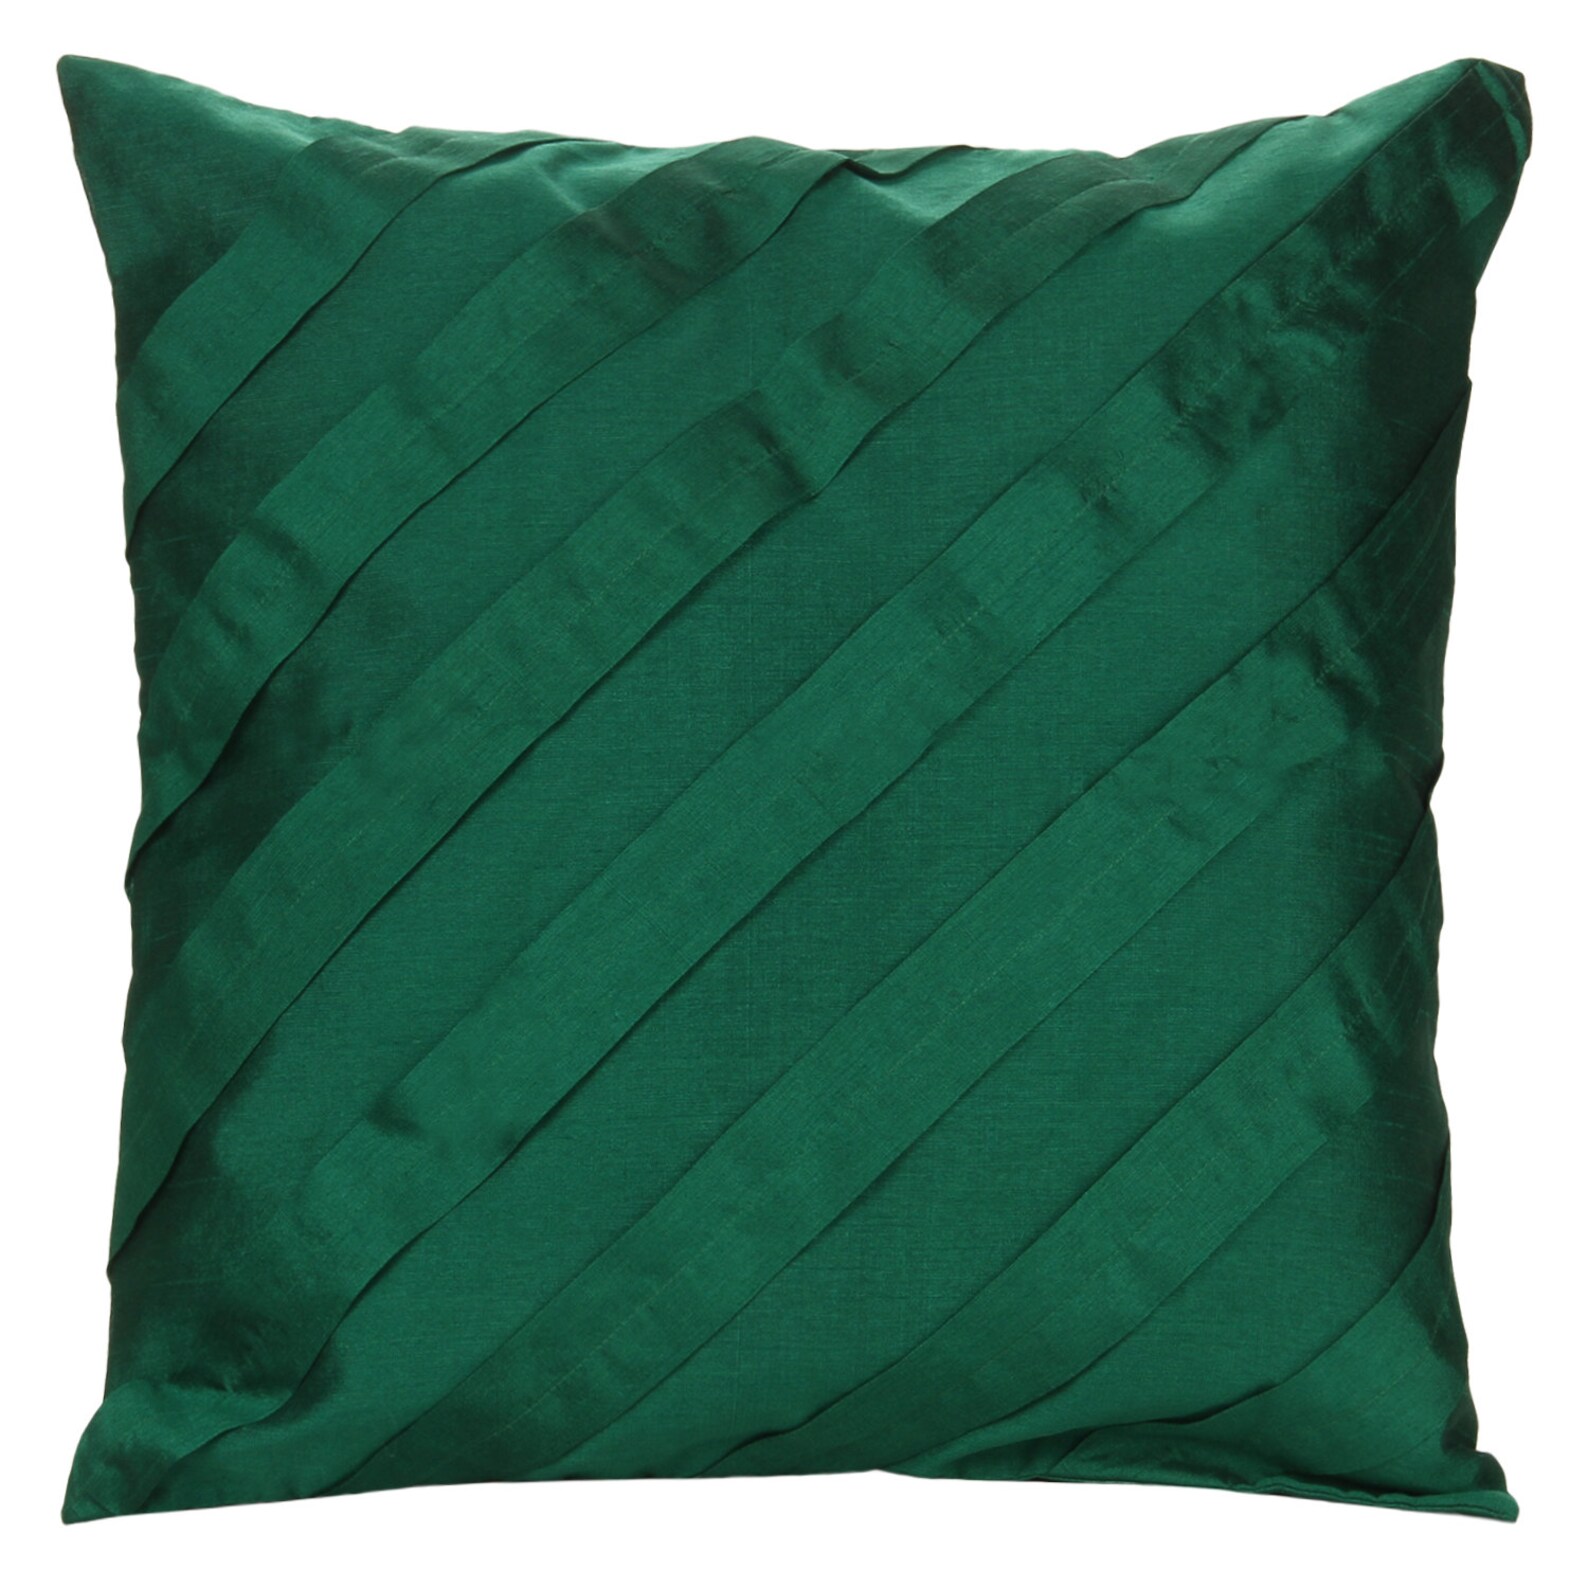 Emerald Green Throw Pillow Cover with Pleating | Etsy